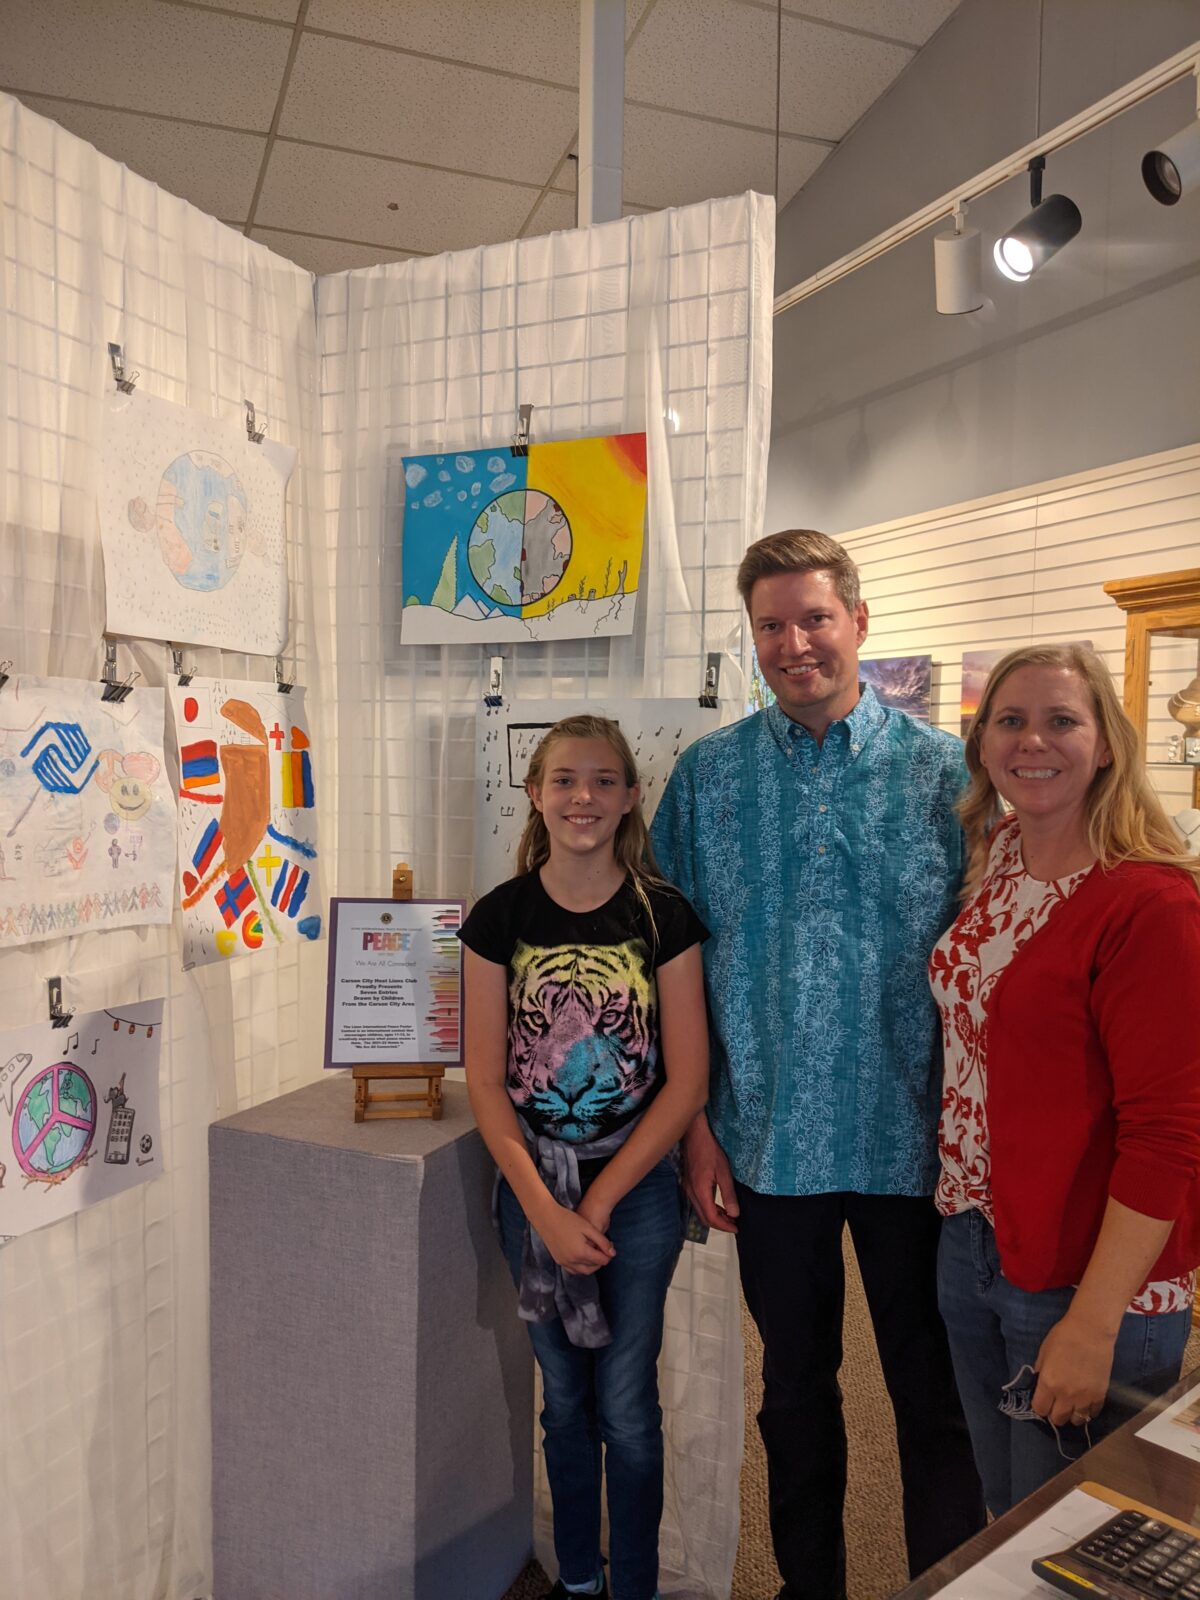 Cadence Schnaible is announced the 2021 Peace Poster Contest Winner Carson City Host Lions